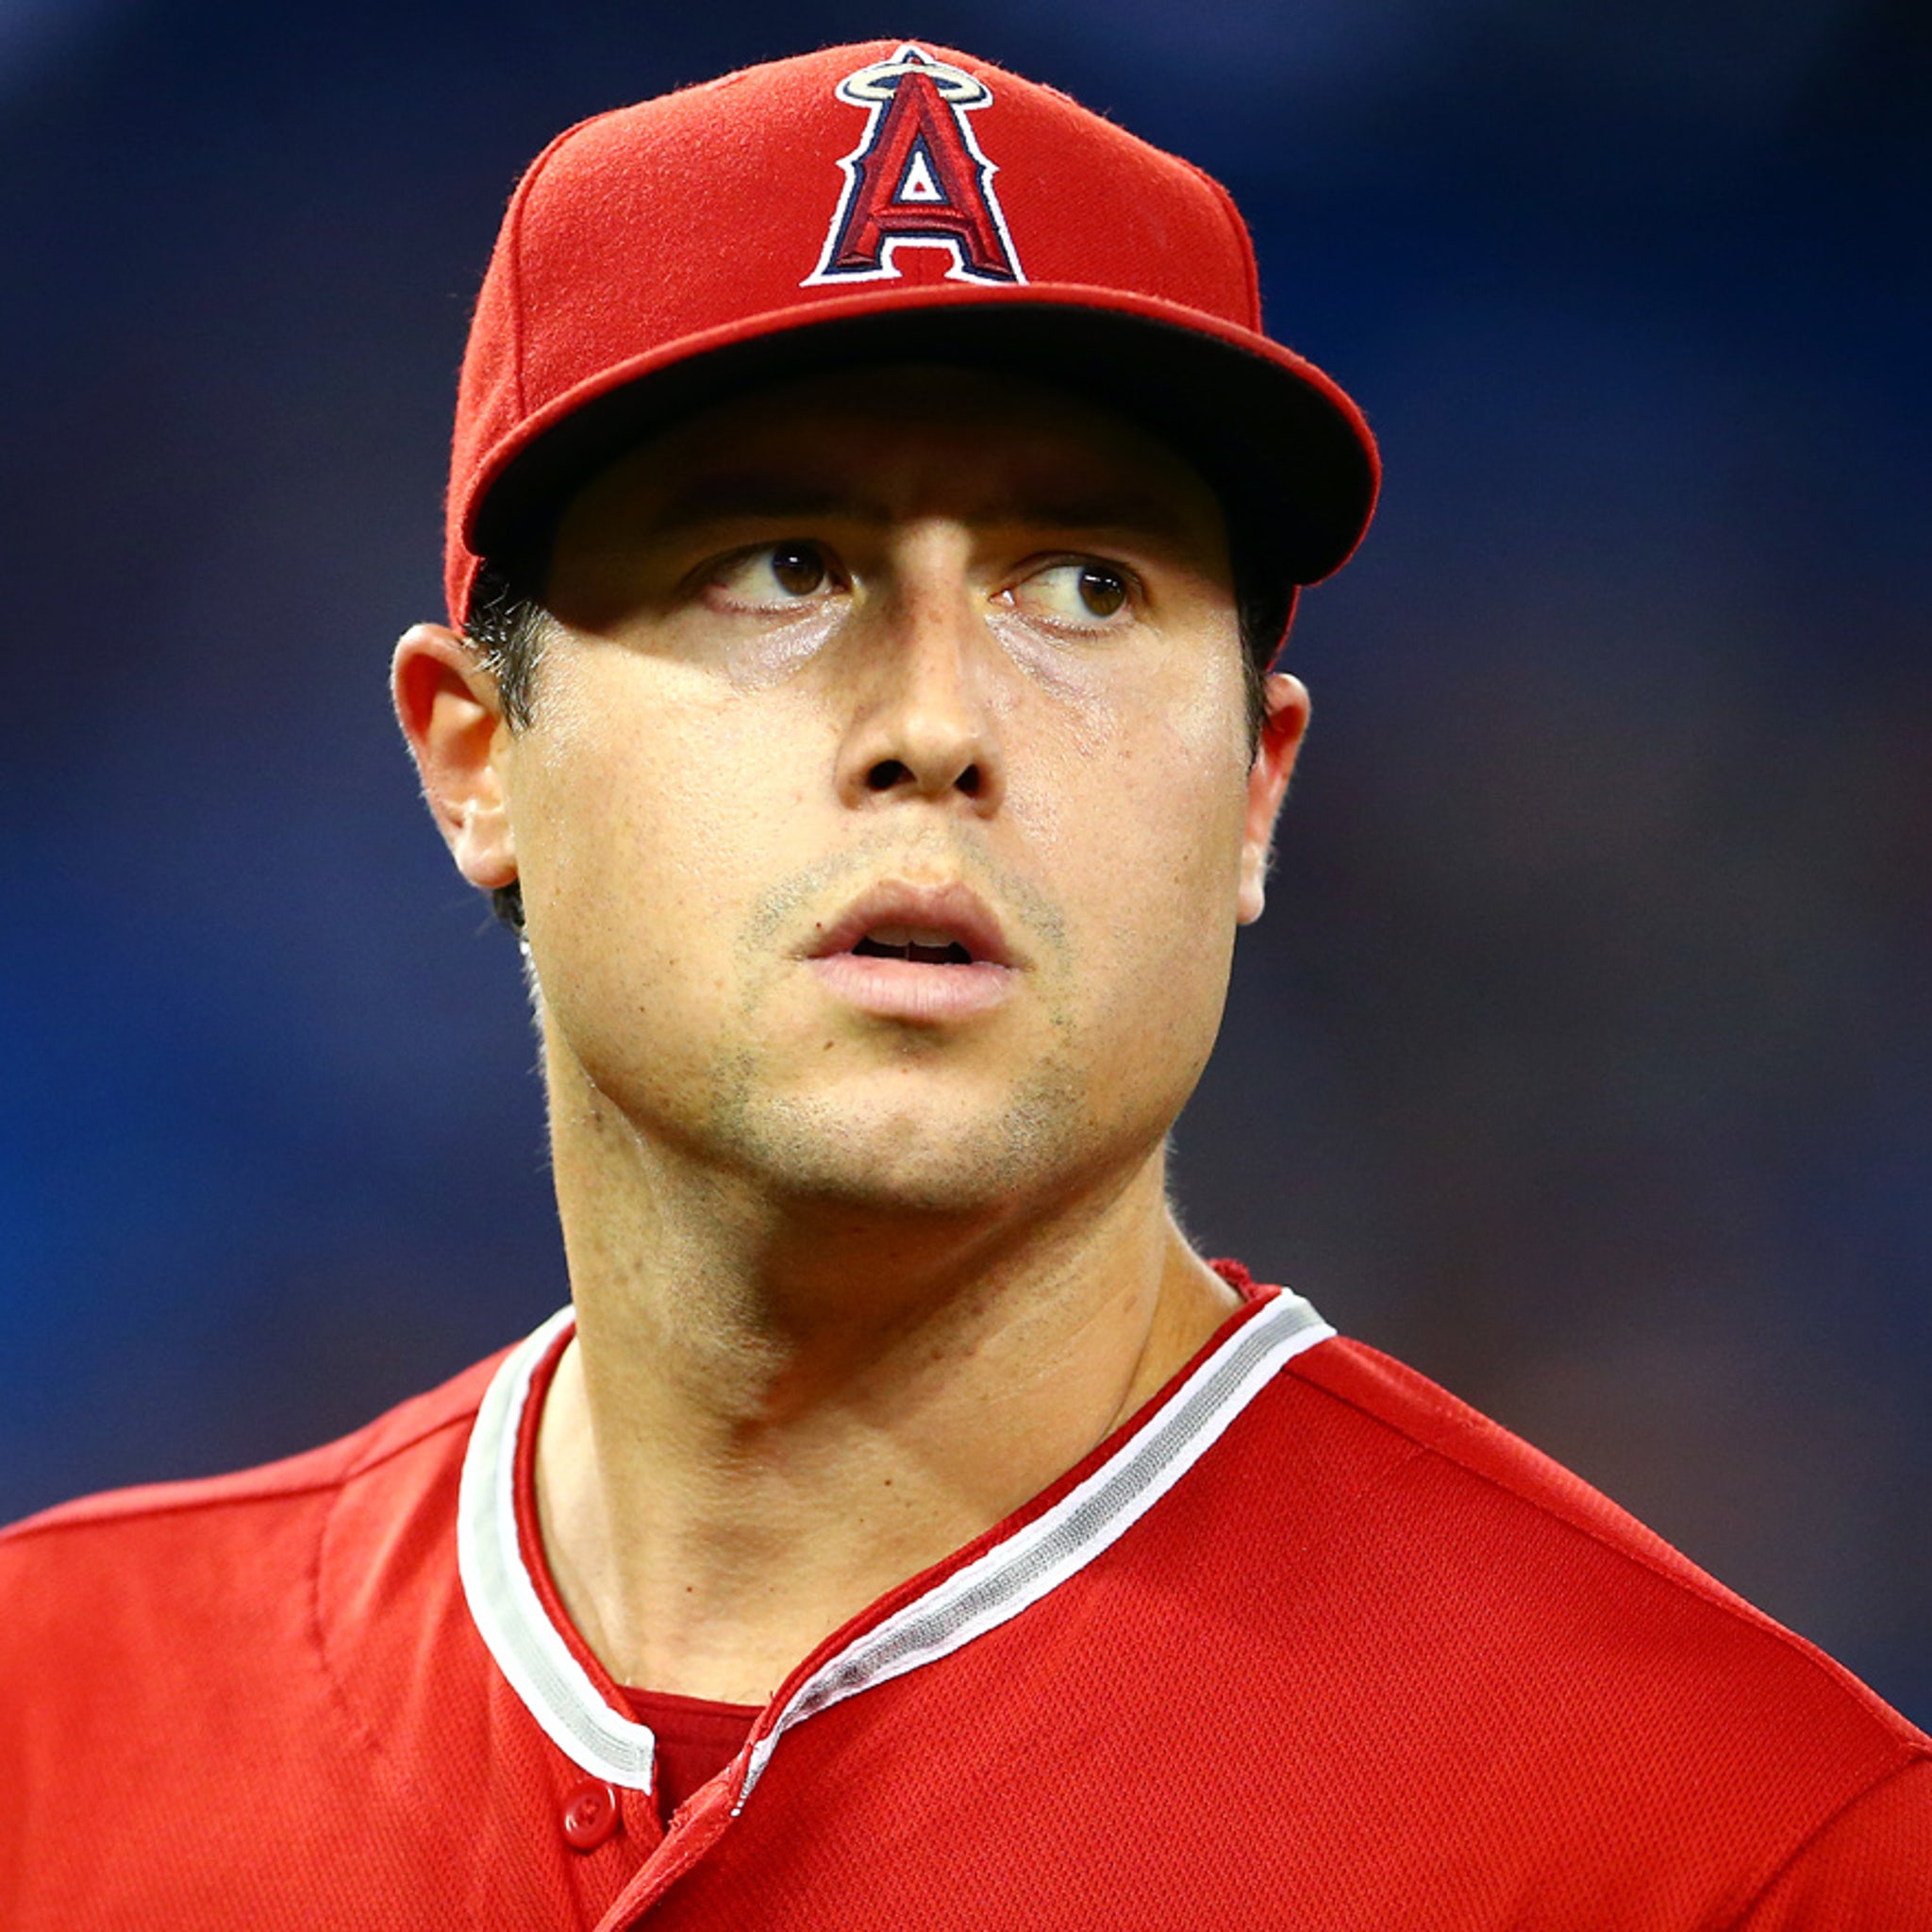 What May Have Caused the Tragic Death of the Angels' Tyler Skaggs